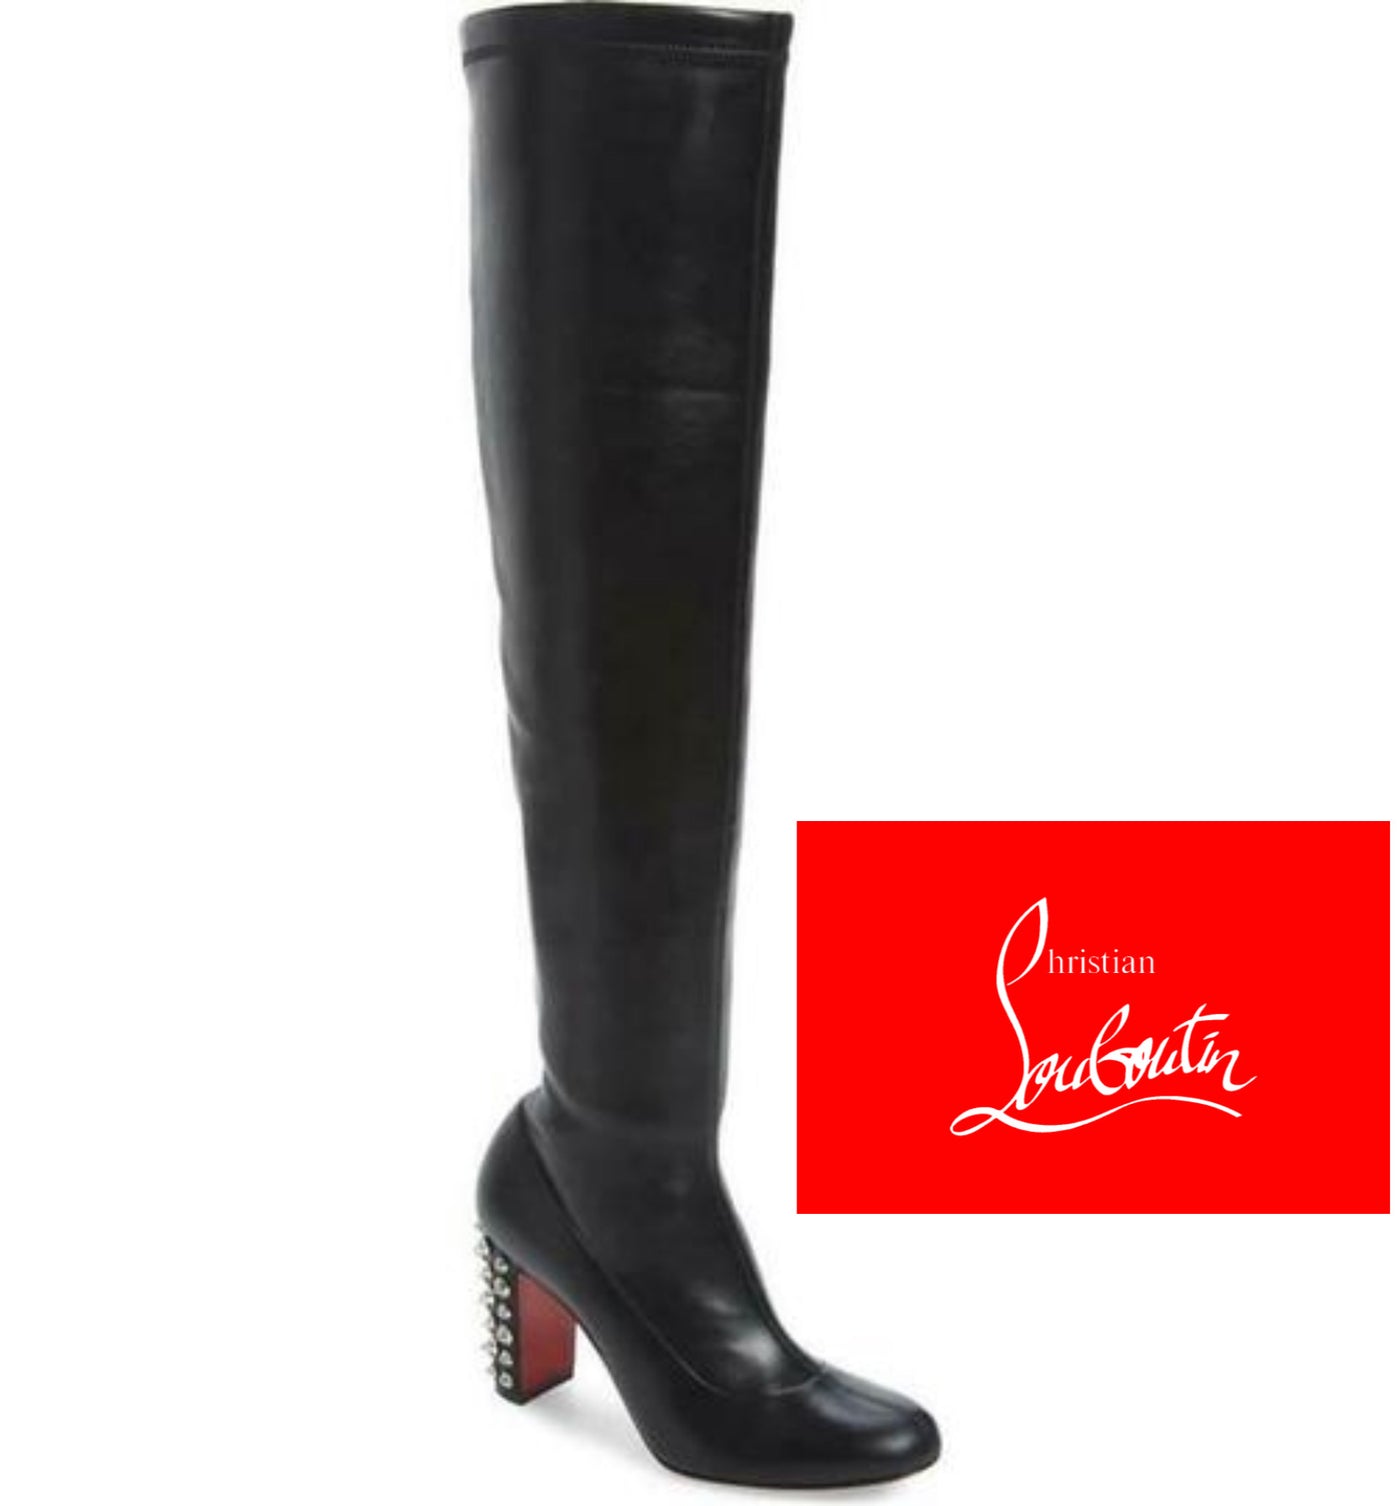 NEW Christian Louboutin Spiked Heel Boots